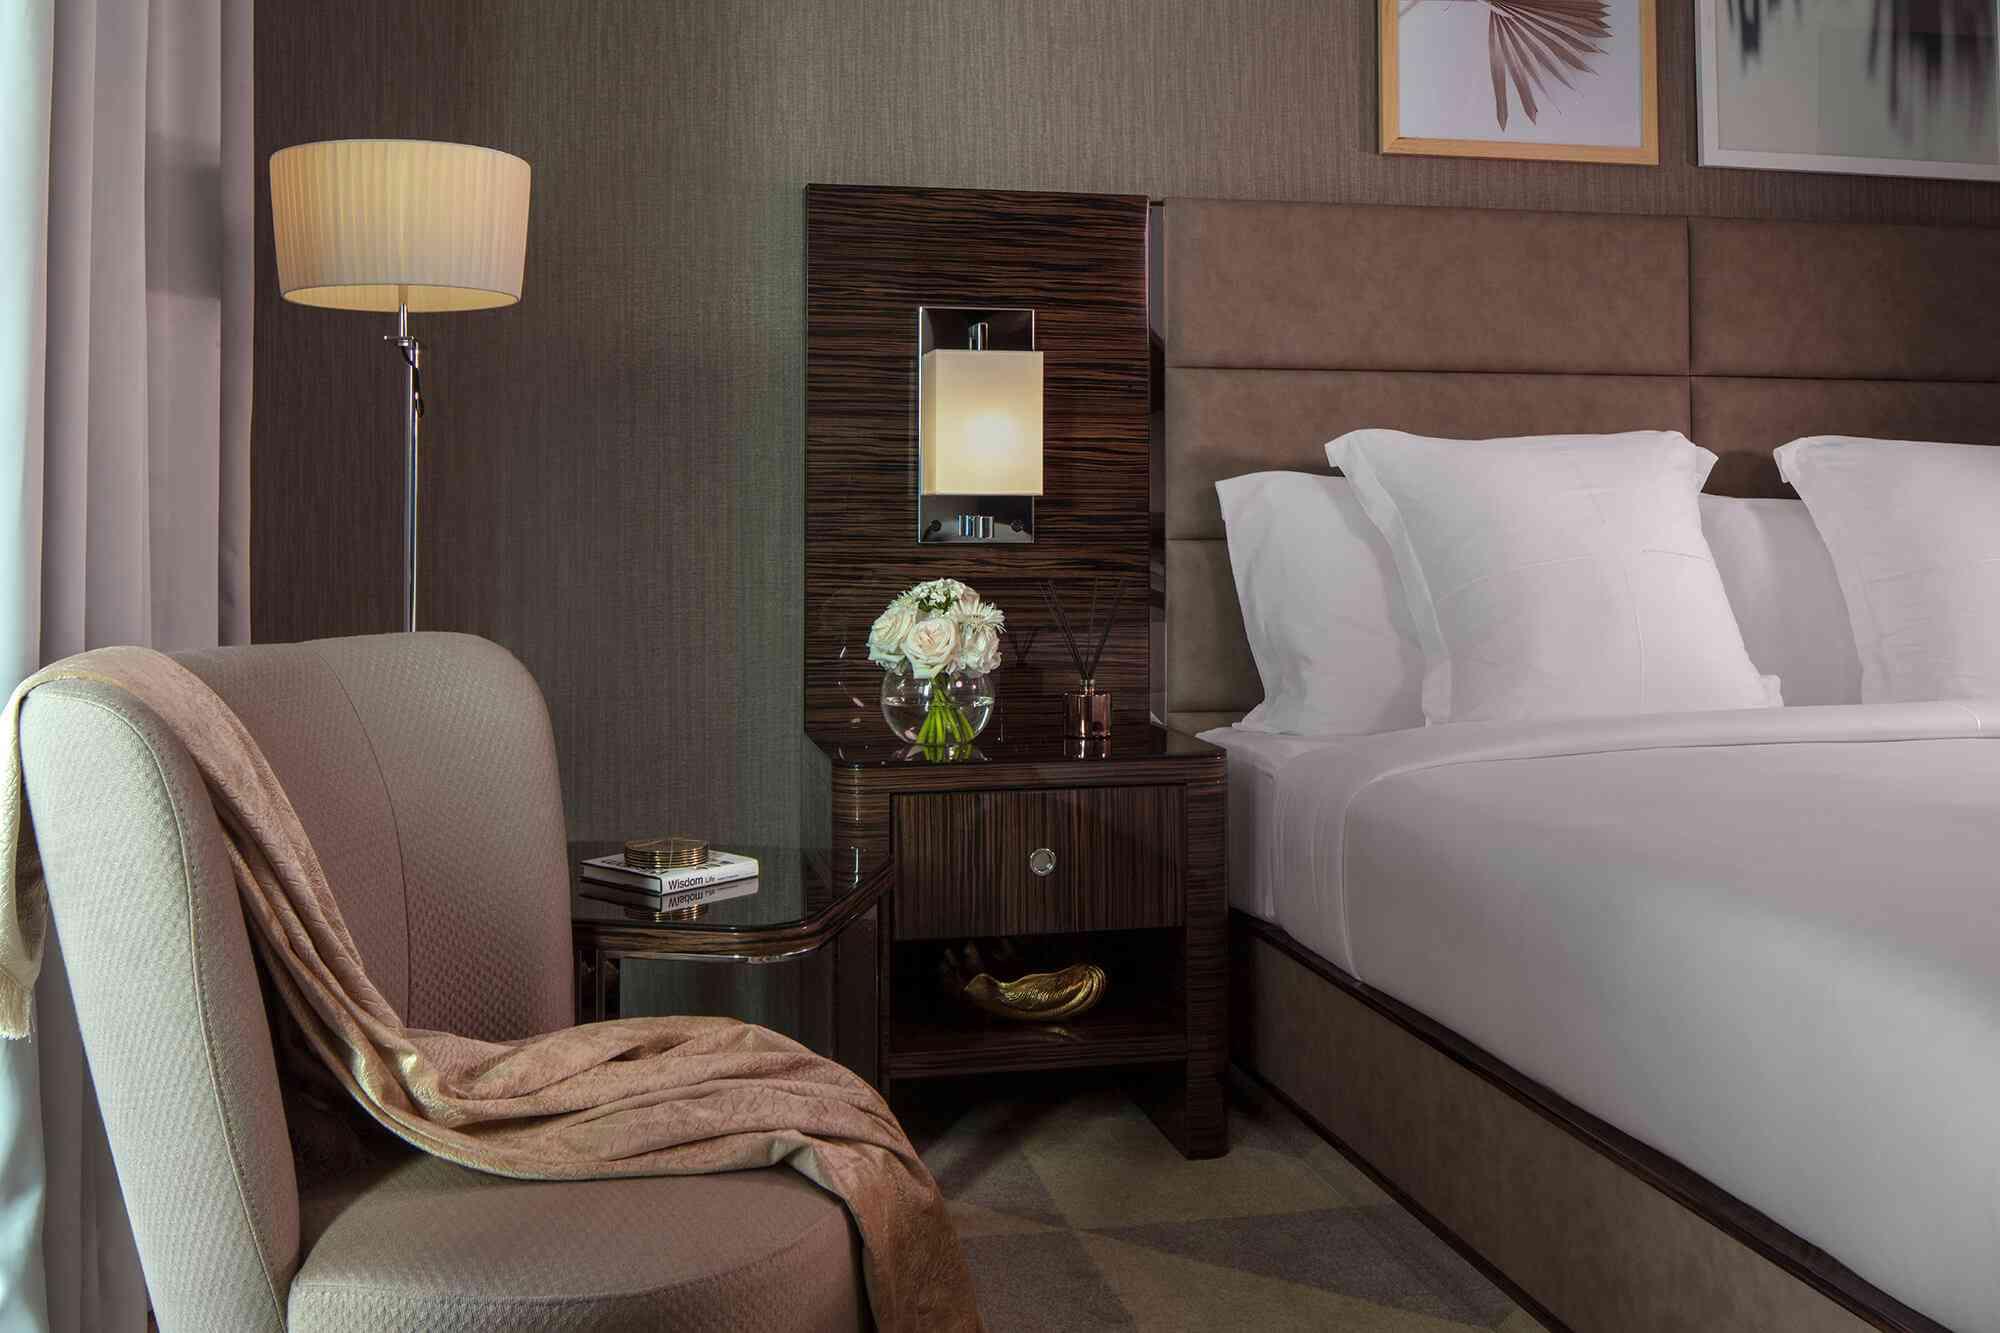 Hyde Dubai General Admission King Room showing a king size bed with bedside tables, cosy armchair with a throw and a floor lamp